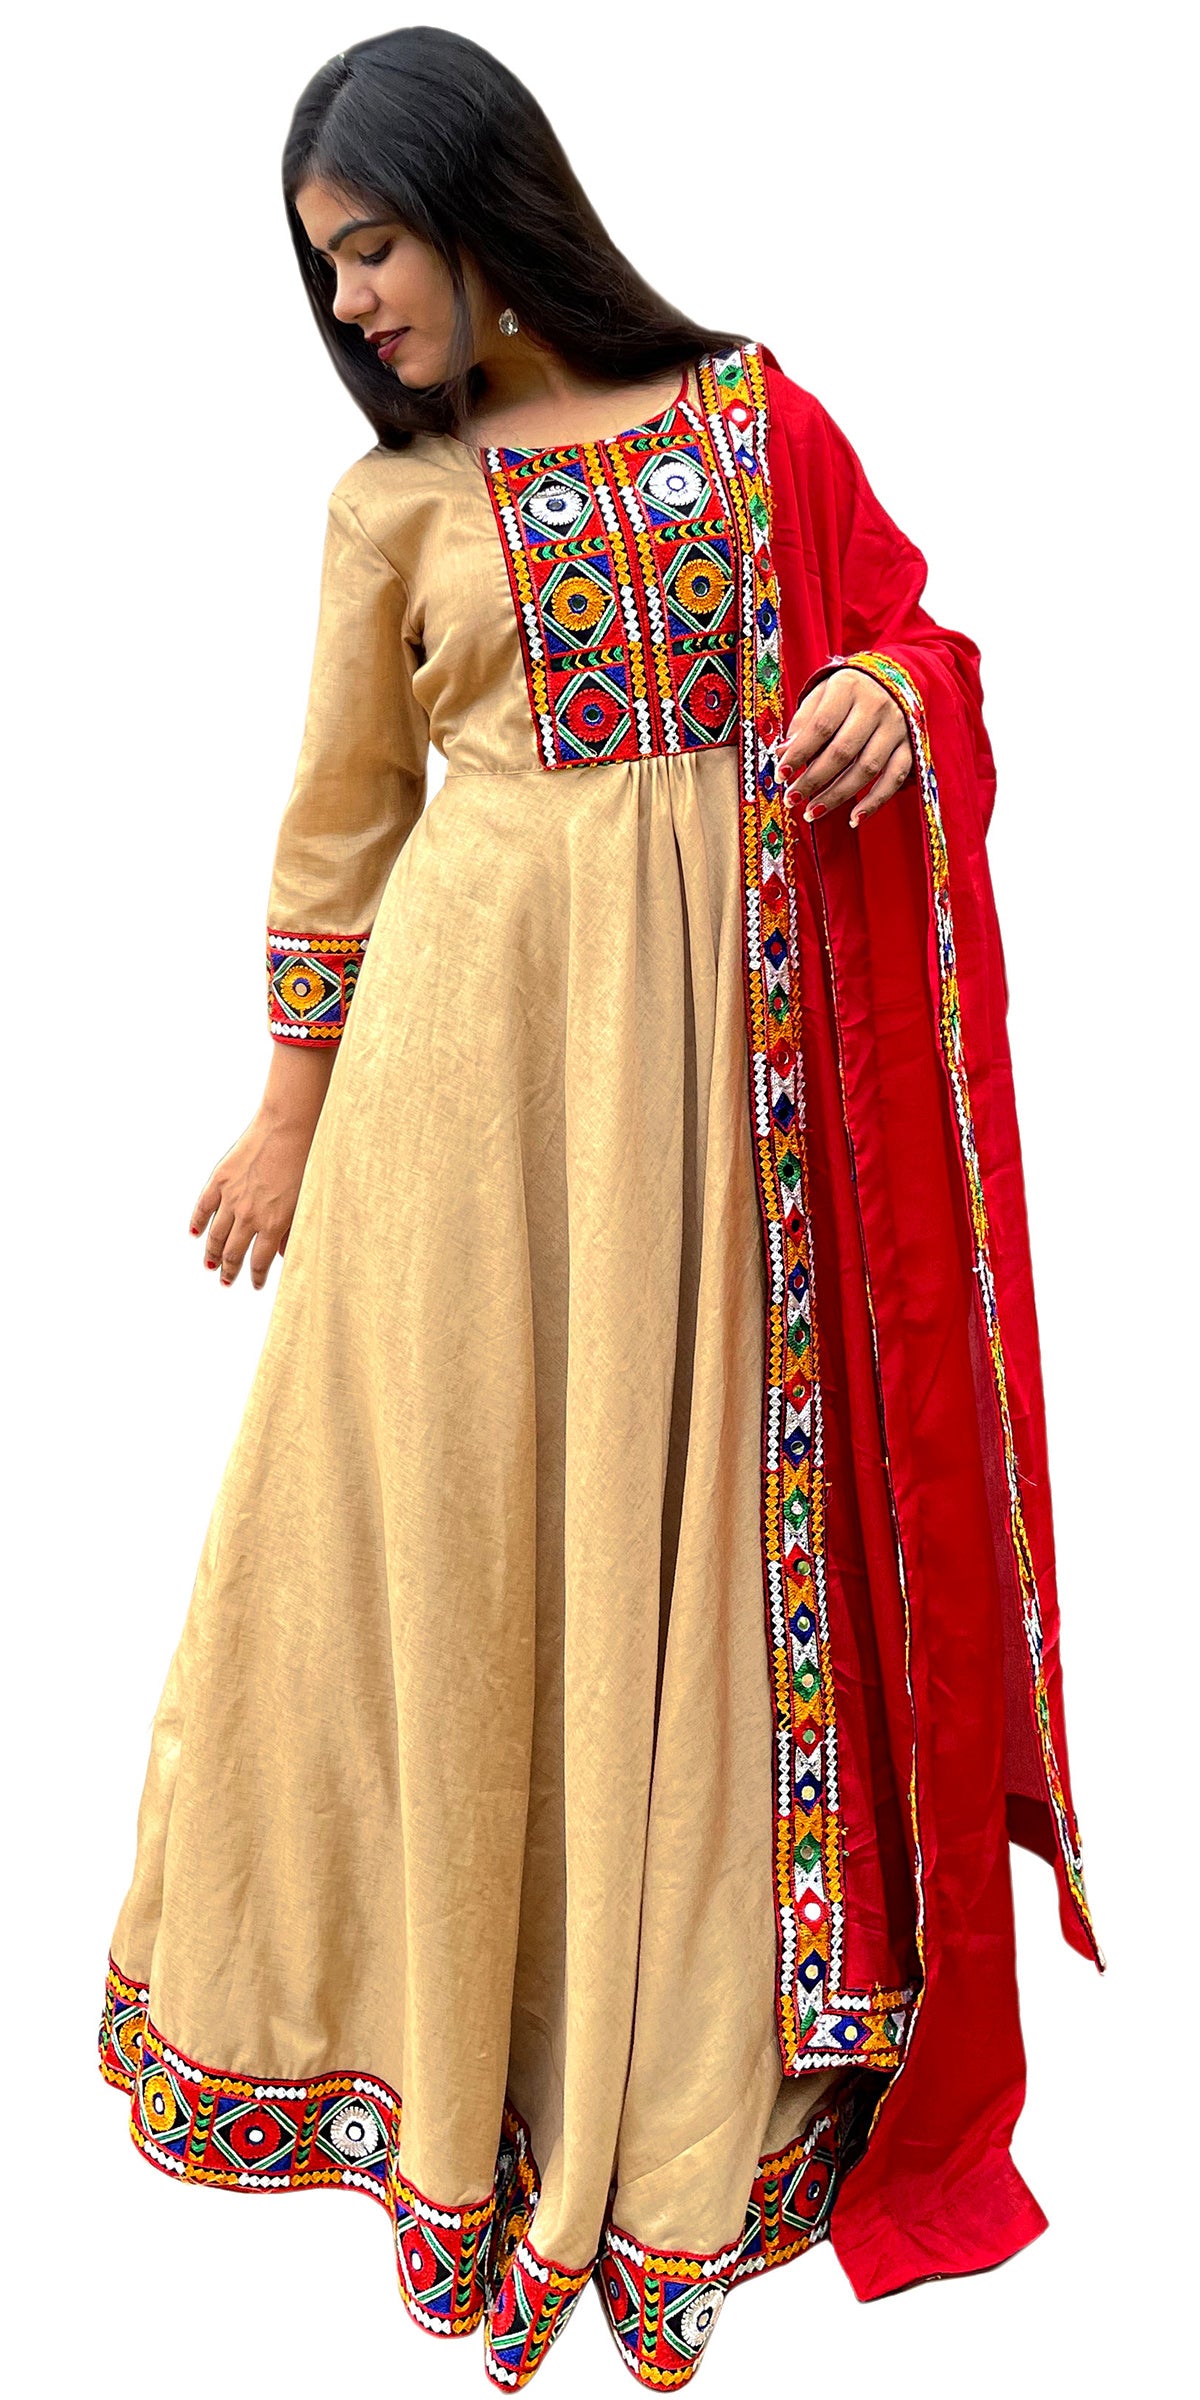 Long Indian Dress, Floor length anarkali gown, Beige Dress Indian style. Embroidery work on long dress, Dress for wedding, Indian Functions dress, Indian Dress with neck work